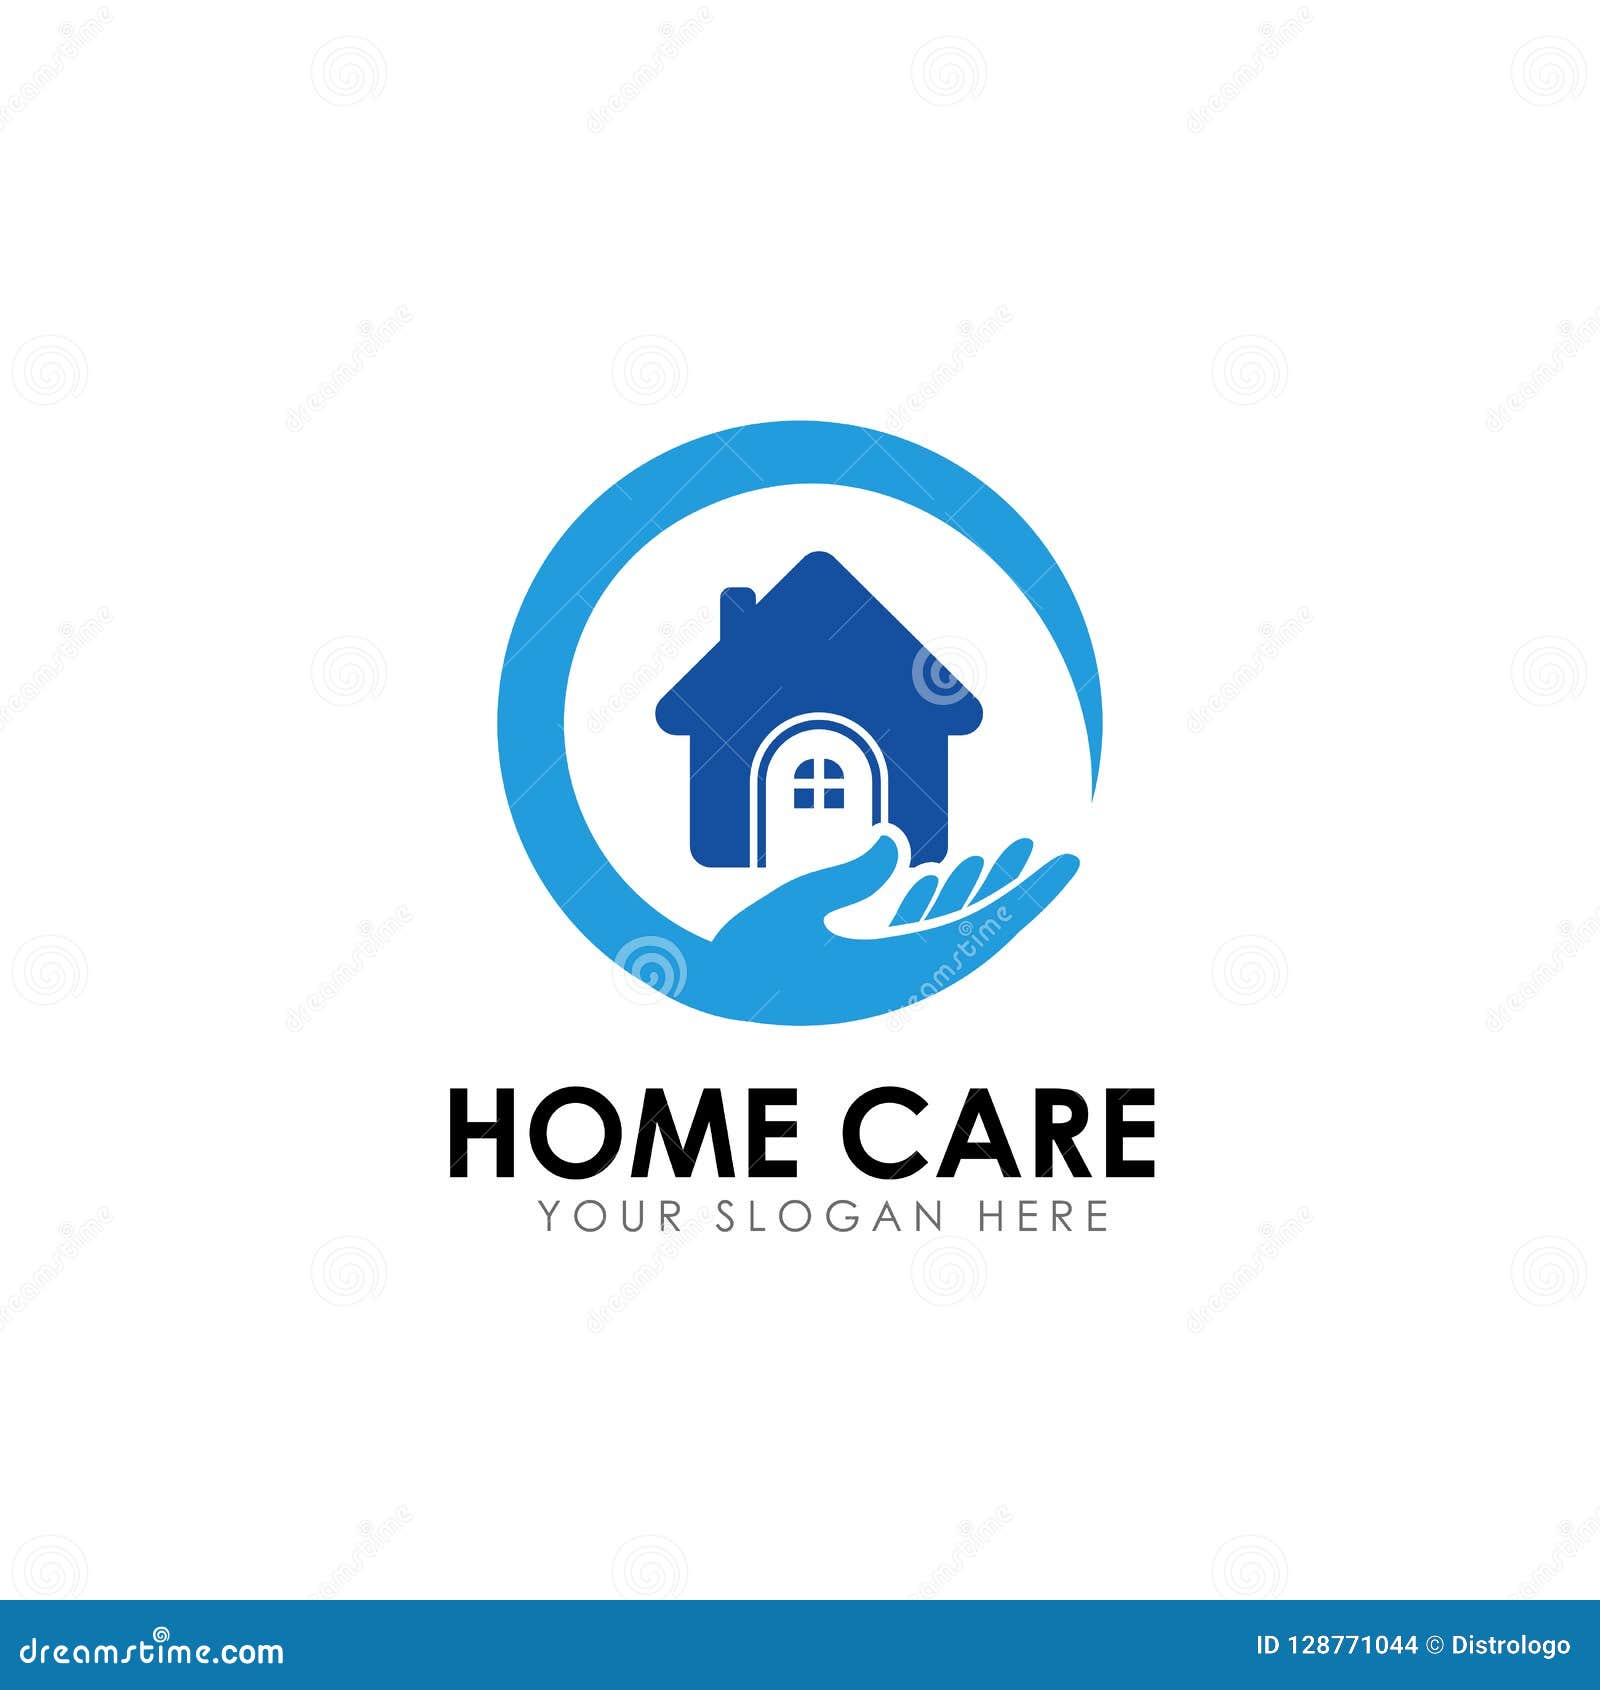 https://thumbs.dreamstime.com/z/home-care-logo-design-template-vector-icon-128771044.jpg